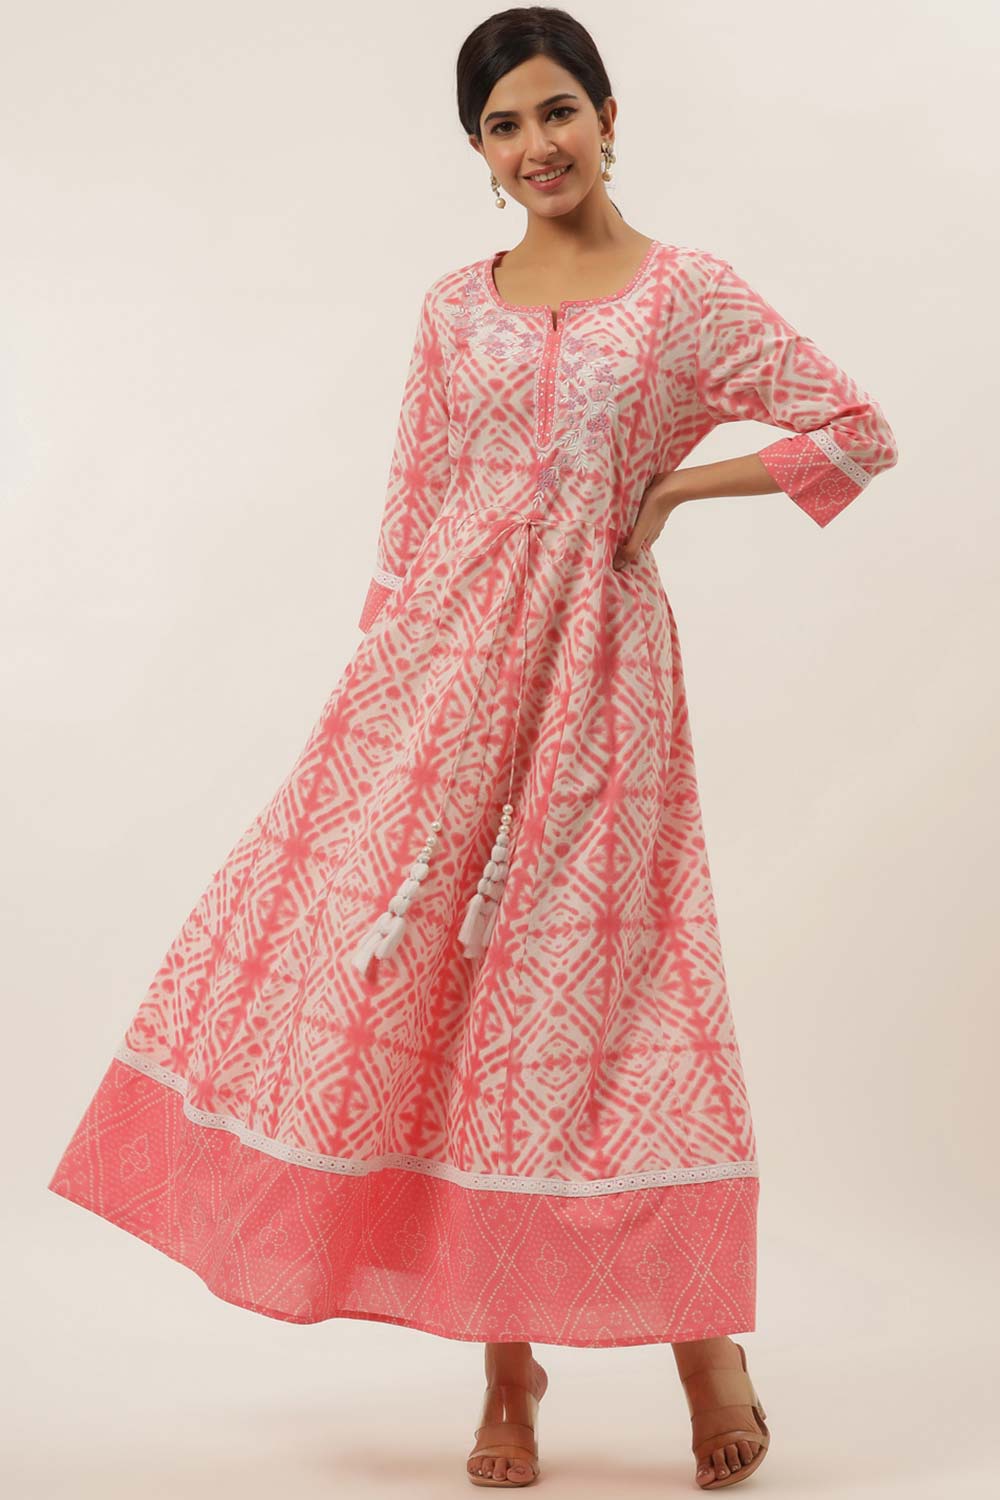 Peach Pure Cotton Embroidered Dress